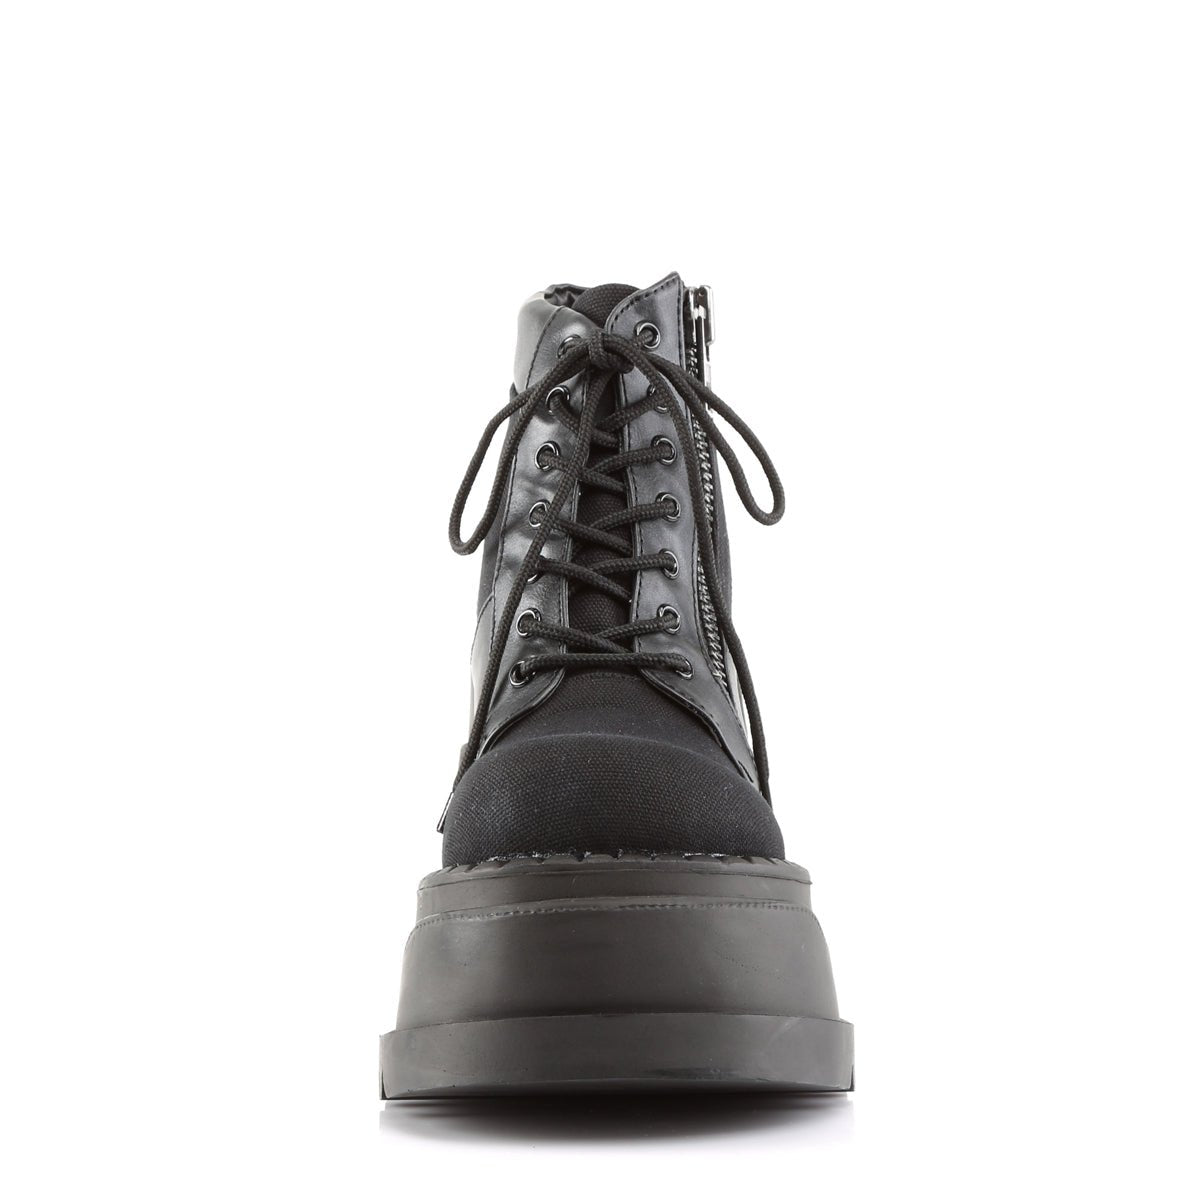 Too Fast | Demonia Stomp 10 | Black Canvas & Vegan Leather Women's Ankle Boots